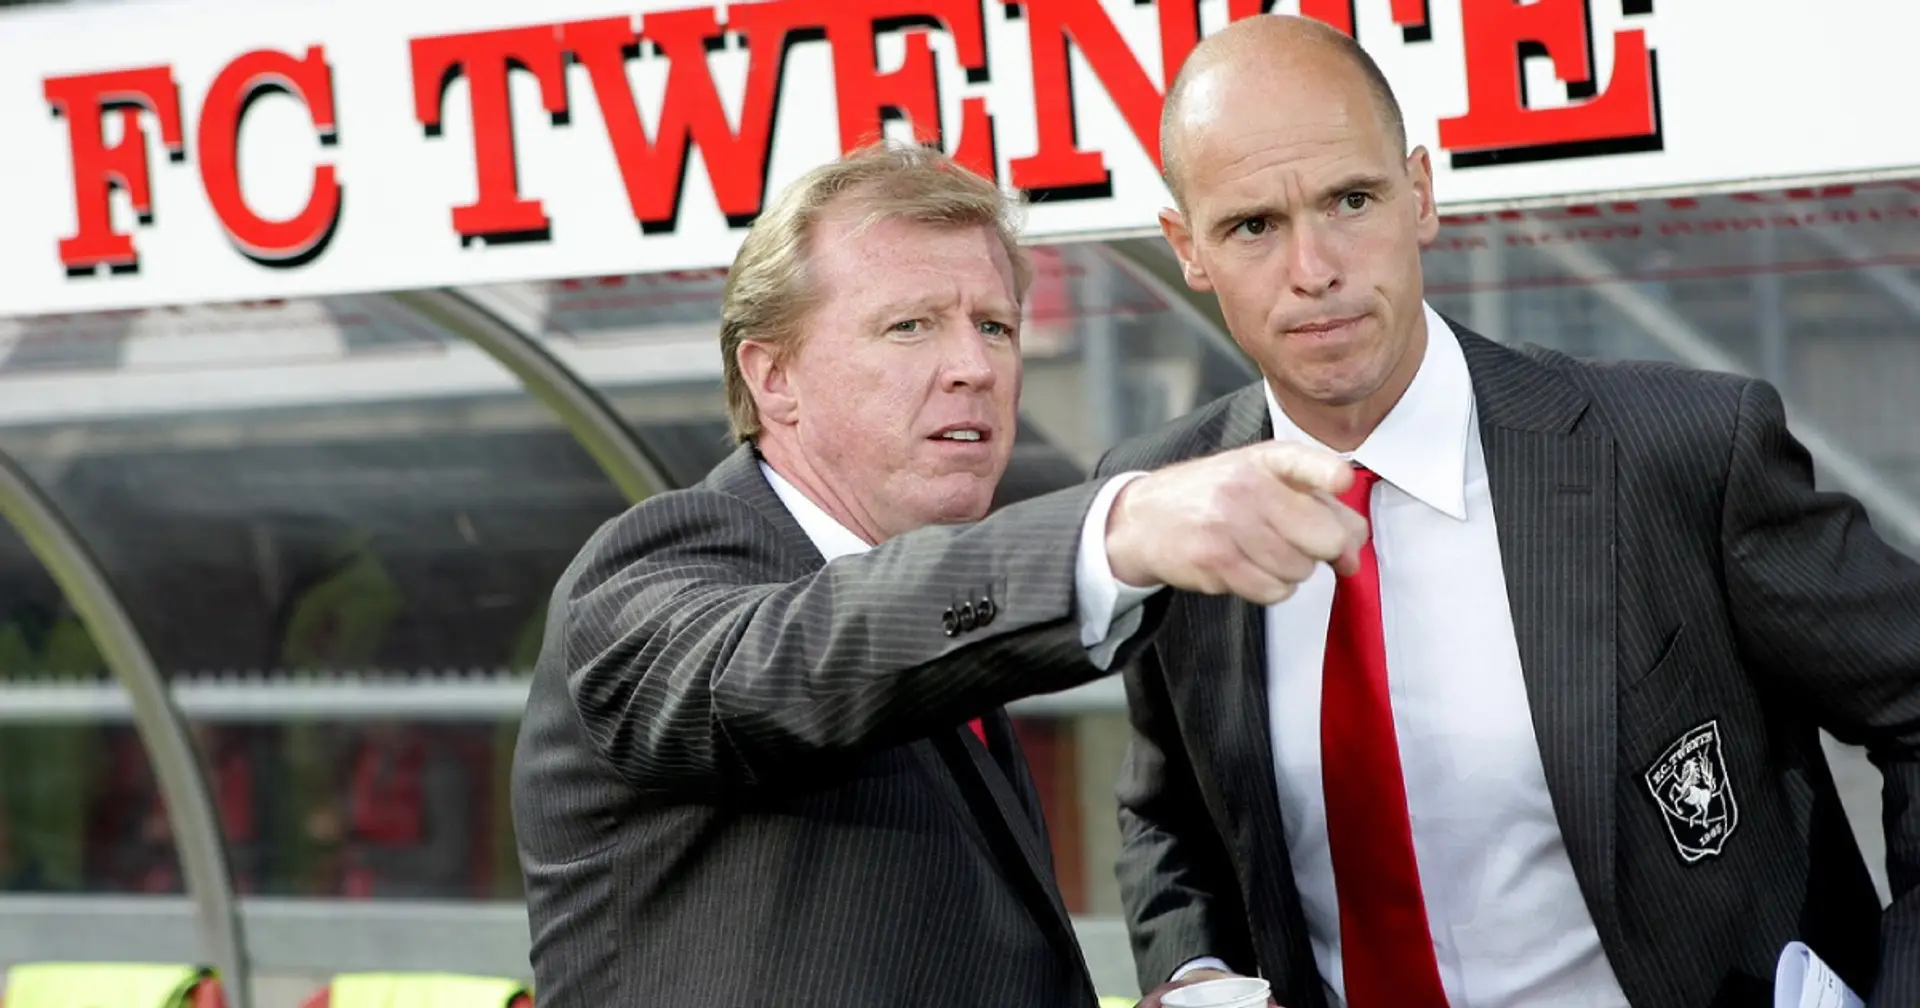 'I had never seen anything like this before': What Steve McClaren said about Ten Hag ahead of Man United reunion